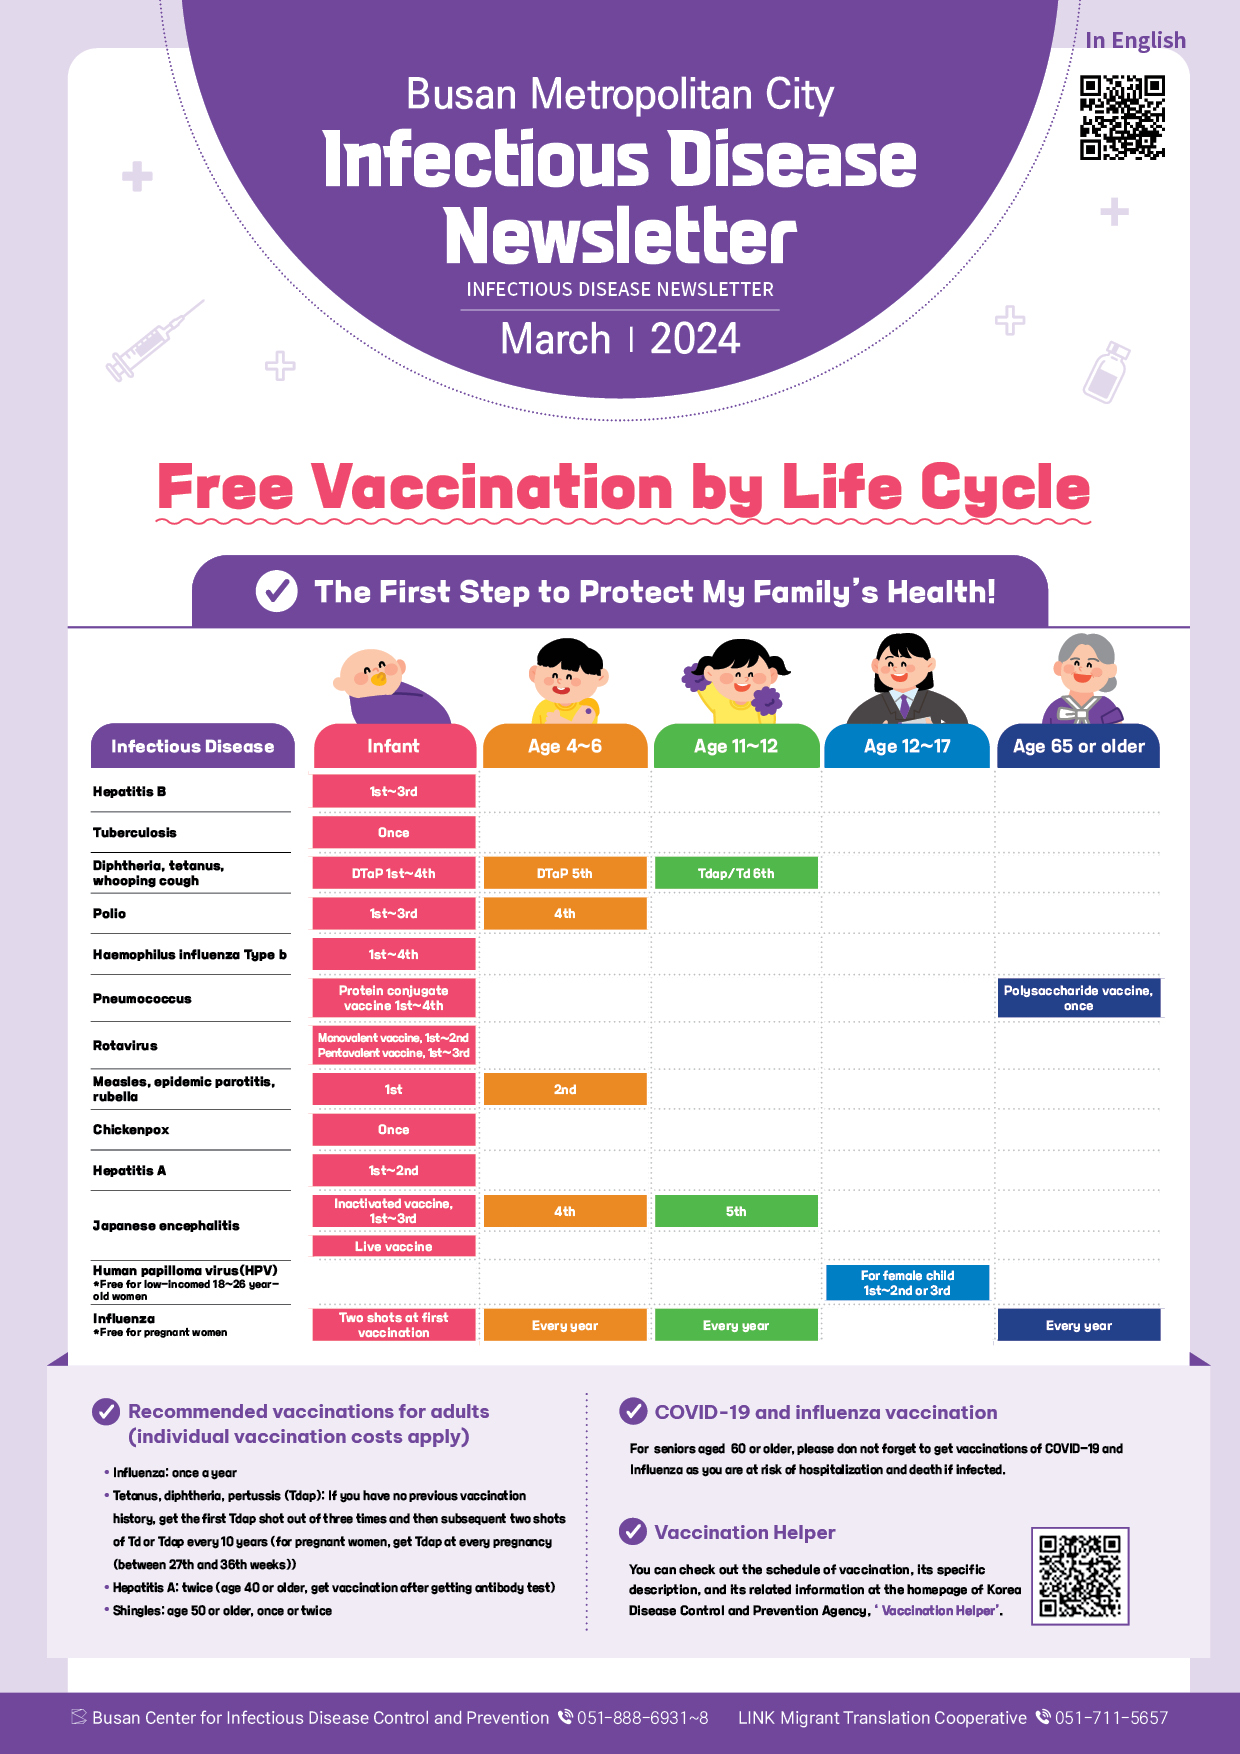 Busan Metropolitan City
Infectious Disease Newsletter
March | 2024
Free Vaccination by Life Cycle, The First Step to Protect My Family’s Health!
Infectious Disease
- Hepatitis B: Infant(1st-3rd )
- Tuberculosis: Infant(Once)
- Diphtheria, tetanus, whooping cough: Infant(DTaP 1st-4th),Age 4-6(DTaP 5th), Age 11-12(Tdap/Td 6th) 
- Polio: Infant(1st-3rd),Age 4-6(4th)
- Haemophilus influenza Type b: Infant(1st-4th)
- Pneumococcus: Infant(Protein conjugate vaccine 1st-4th), Age 65 or older(Polysaccharide vaccine, once)
- Rotavirus: Infant(monovalent vaccine, 1st-2nd Pentavalent vaccine, 1st-3rd)
- Measles, epidemic parotitis, rubella: Infant(1st), Age 4-6(2nd)
- Chickenpox: Infant(Once)
- Hepatitis A: Infant(1st-2nd) 
- Japanese encephalitis: Infant(Inactivated vaccine, 1st-3rd), Age 4-6(4th), Age 11-12(5th)
- Human papilloma virus(HPV): Age 12-17(For female child 1st-2nd or 3rd)
  * Free for low-incomed 18-26 year-old women
- Influenza: Infant(Two shots at first vaccination),Age 4-6(Every year), Age 11-12(Every year)
Recommended vaccinations for adults (individual vaccination costs apply)
- Influenza: once a year
- Tetanus, diphtheria, pertussis (Tdap): If you have no previous vaccination history, get the first Tdap shot out of three times and then subsequent two shots of Td or Tdap every 10 years (for pregnant women, get Tdap at every pregnancy (between 27th and 36th weeks))
- Hepatitis A: twice (age 40 or older, get vaccination after getting antibody test)
- Shingles: age 50 or older, once or twice
COVID-19 and influenza vaccination
- For seniors aged  60 or older, please don not forget to get vaccinations of COVID-19 and Influenza as you are at risk of hospitalization and death if infected.
Vaccination Helper
- You can check out the schedule of vaccination, its specific description, and its related information at the homepage of Korea Disease Control and Prevention Agency, ‘ Vaccination Helper'.
Busan Center for Infectious Disease Control and Prevention: 051-888-6931~8
LINK Migrant Translation Cooperative: 051-711-5657 사진0